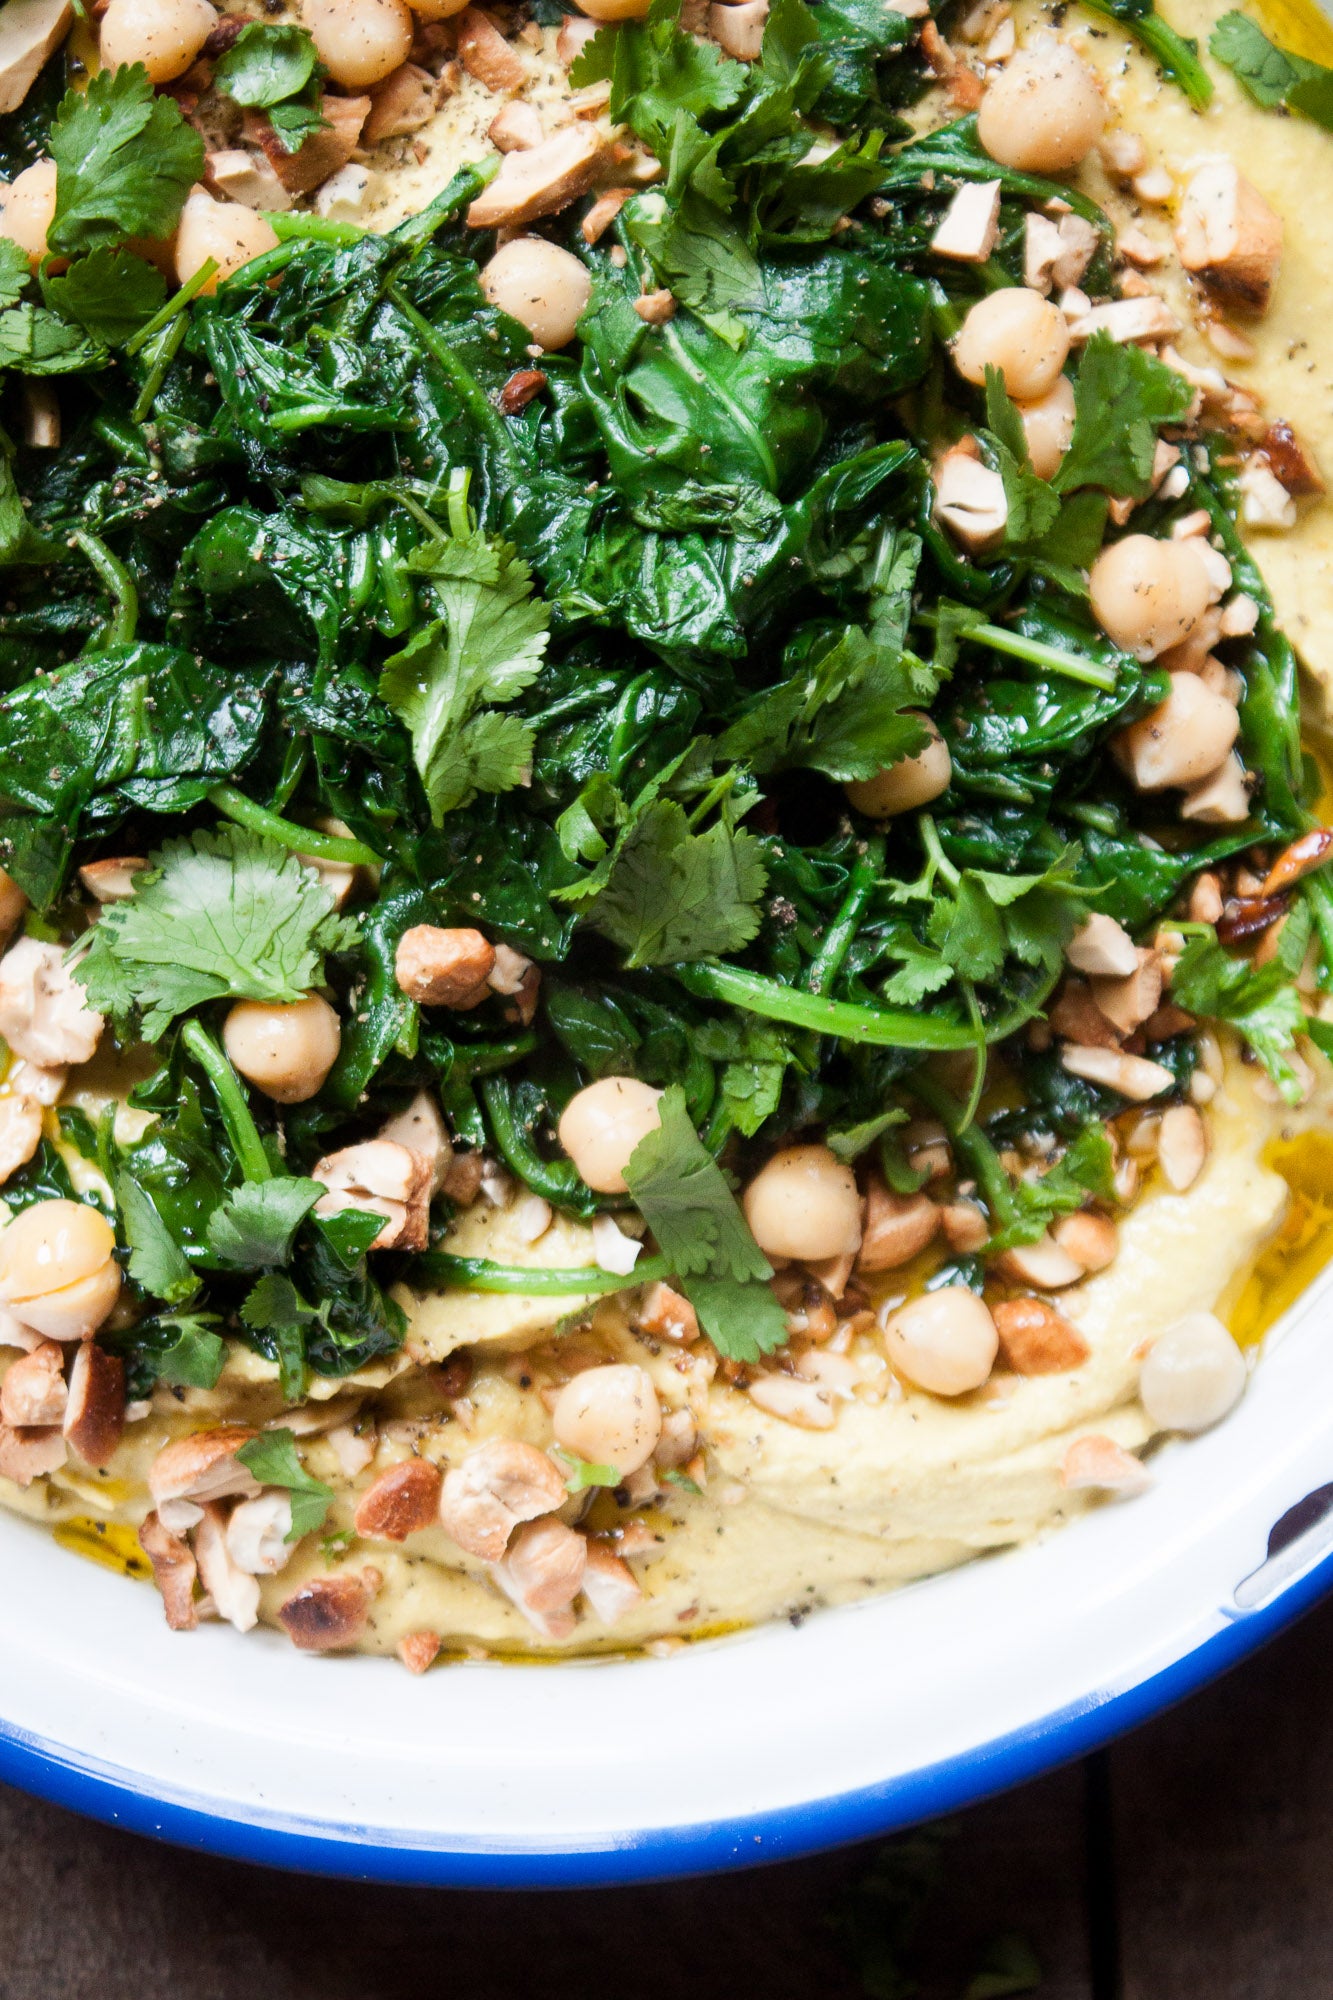 Chipotle Hummus Platter with Cashews + Greens